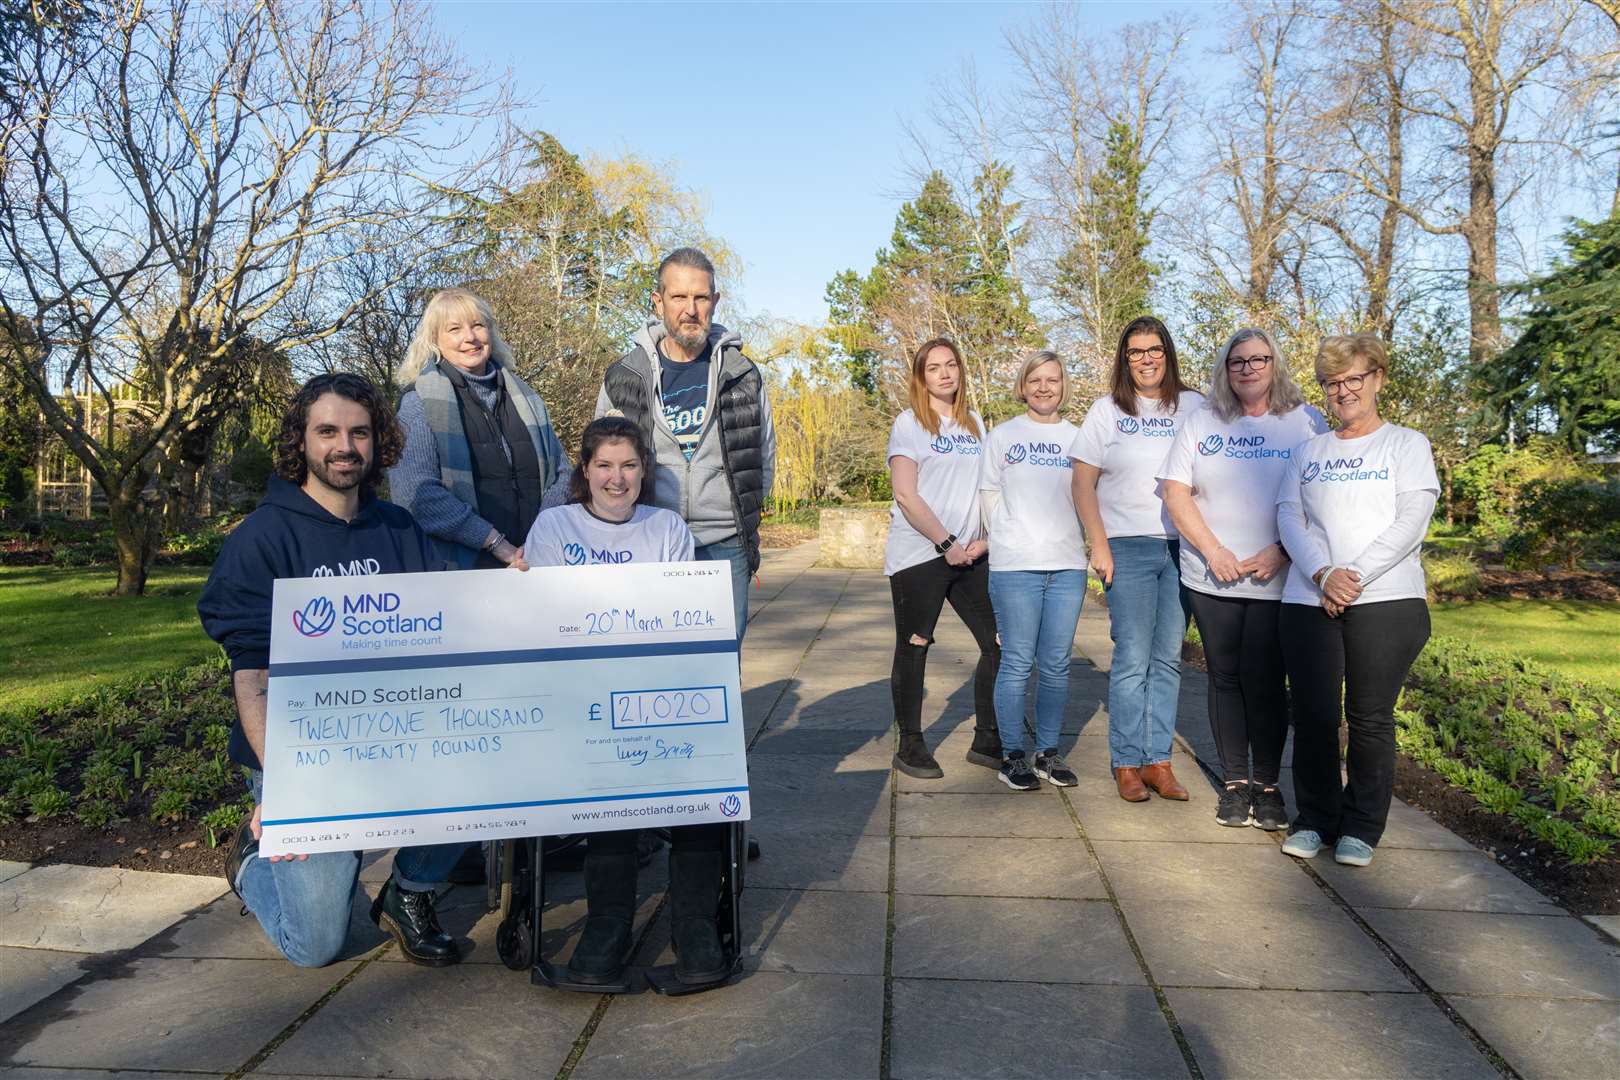 Handing over the cheque for £21,000, from left, Jonathan Mitchell (Fundraising Leader & Events Manager MND Scotland), Lydia Lintott (mum), Lucy Smith, Robert Lintott (dad), Samatha McKay, Mary Smith, Michelle Anderson, Tracy Stevenson and Kay Jackson.Picture: Beth Taylor.